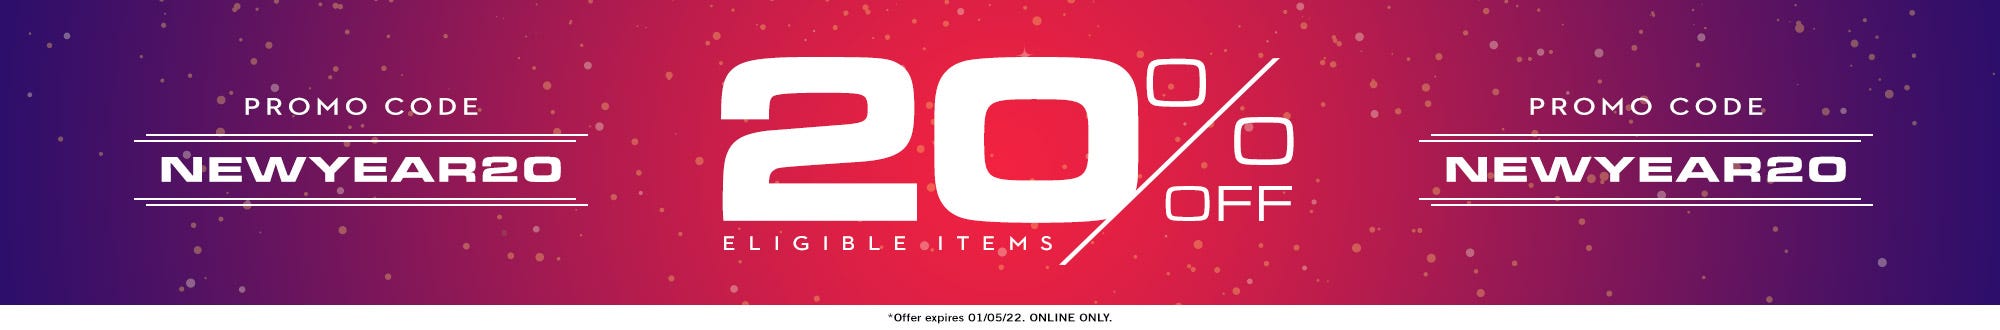 New Year Sale: 20% off